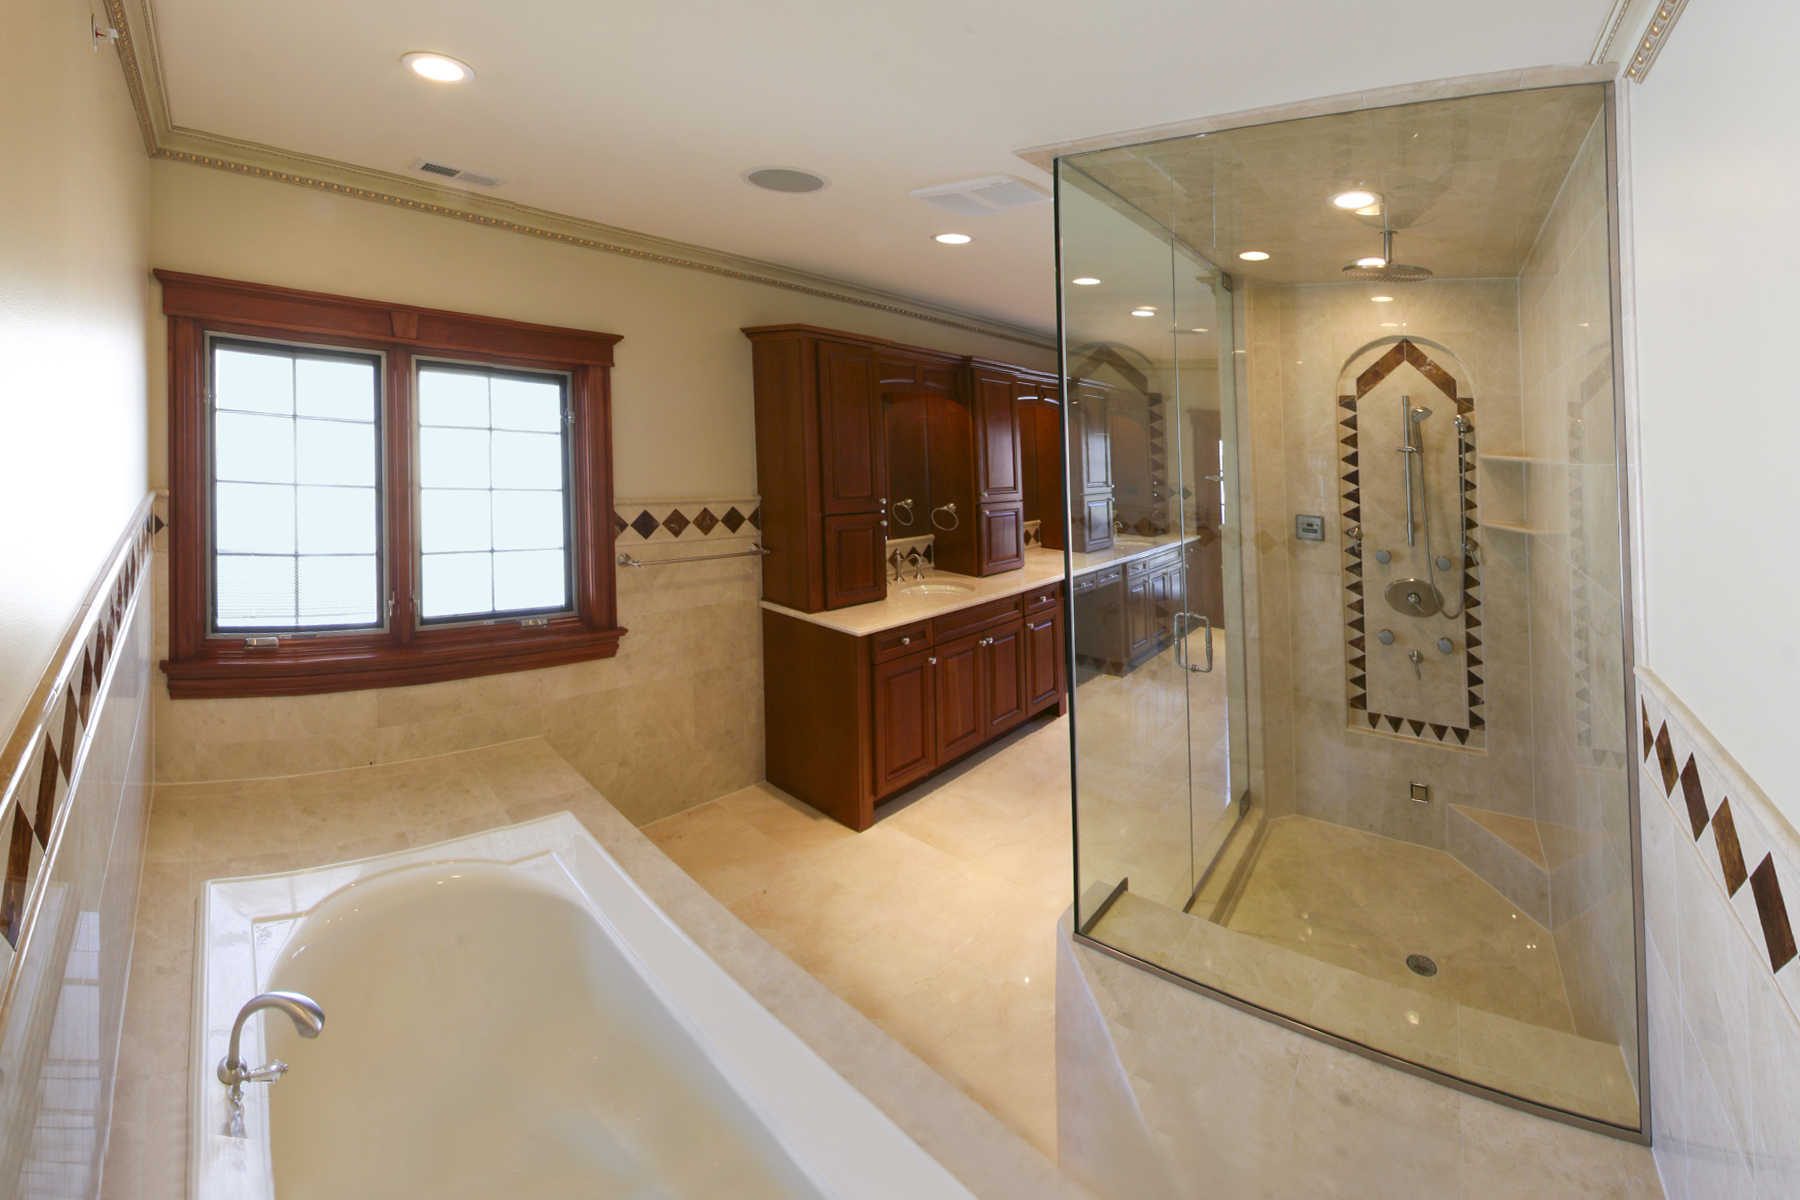 Master Bathroom, Shower - Navajo Ave., Lincolnwood, IL Custom Home. America's Custom Home Builders: New Construction, Remodeling, Restoration Services. Residential and Commercial.